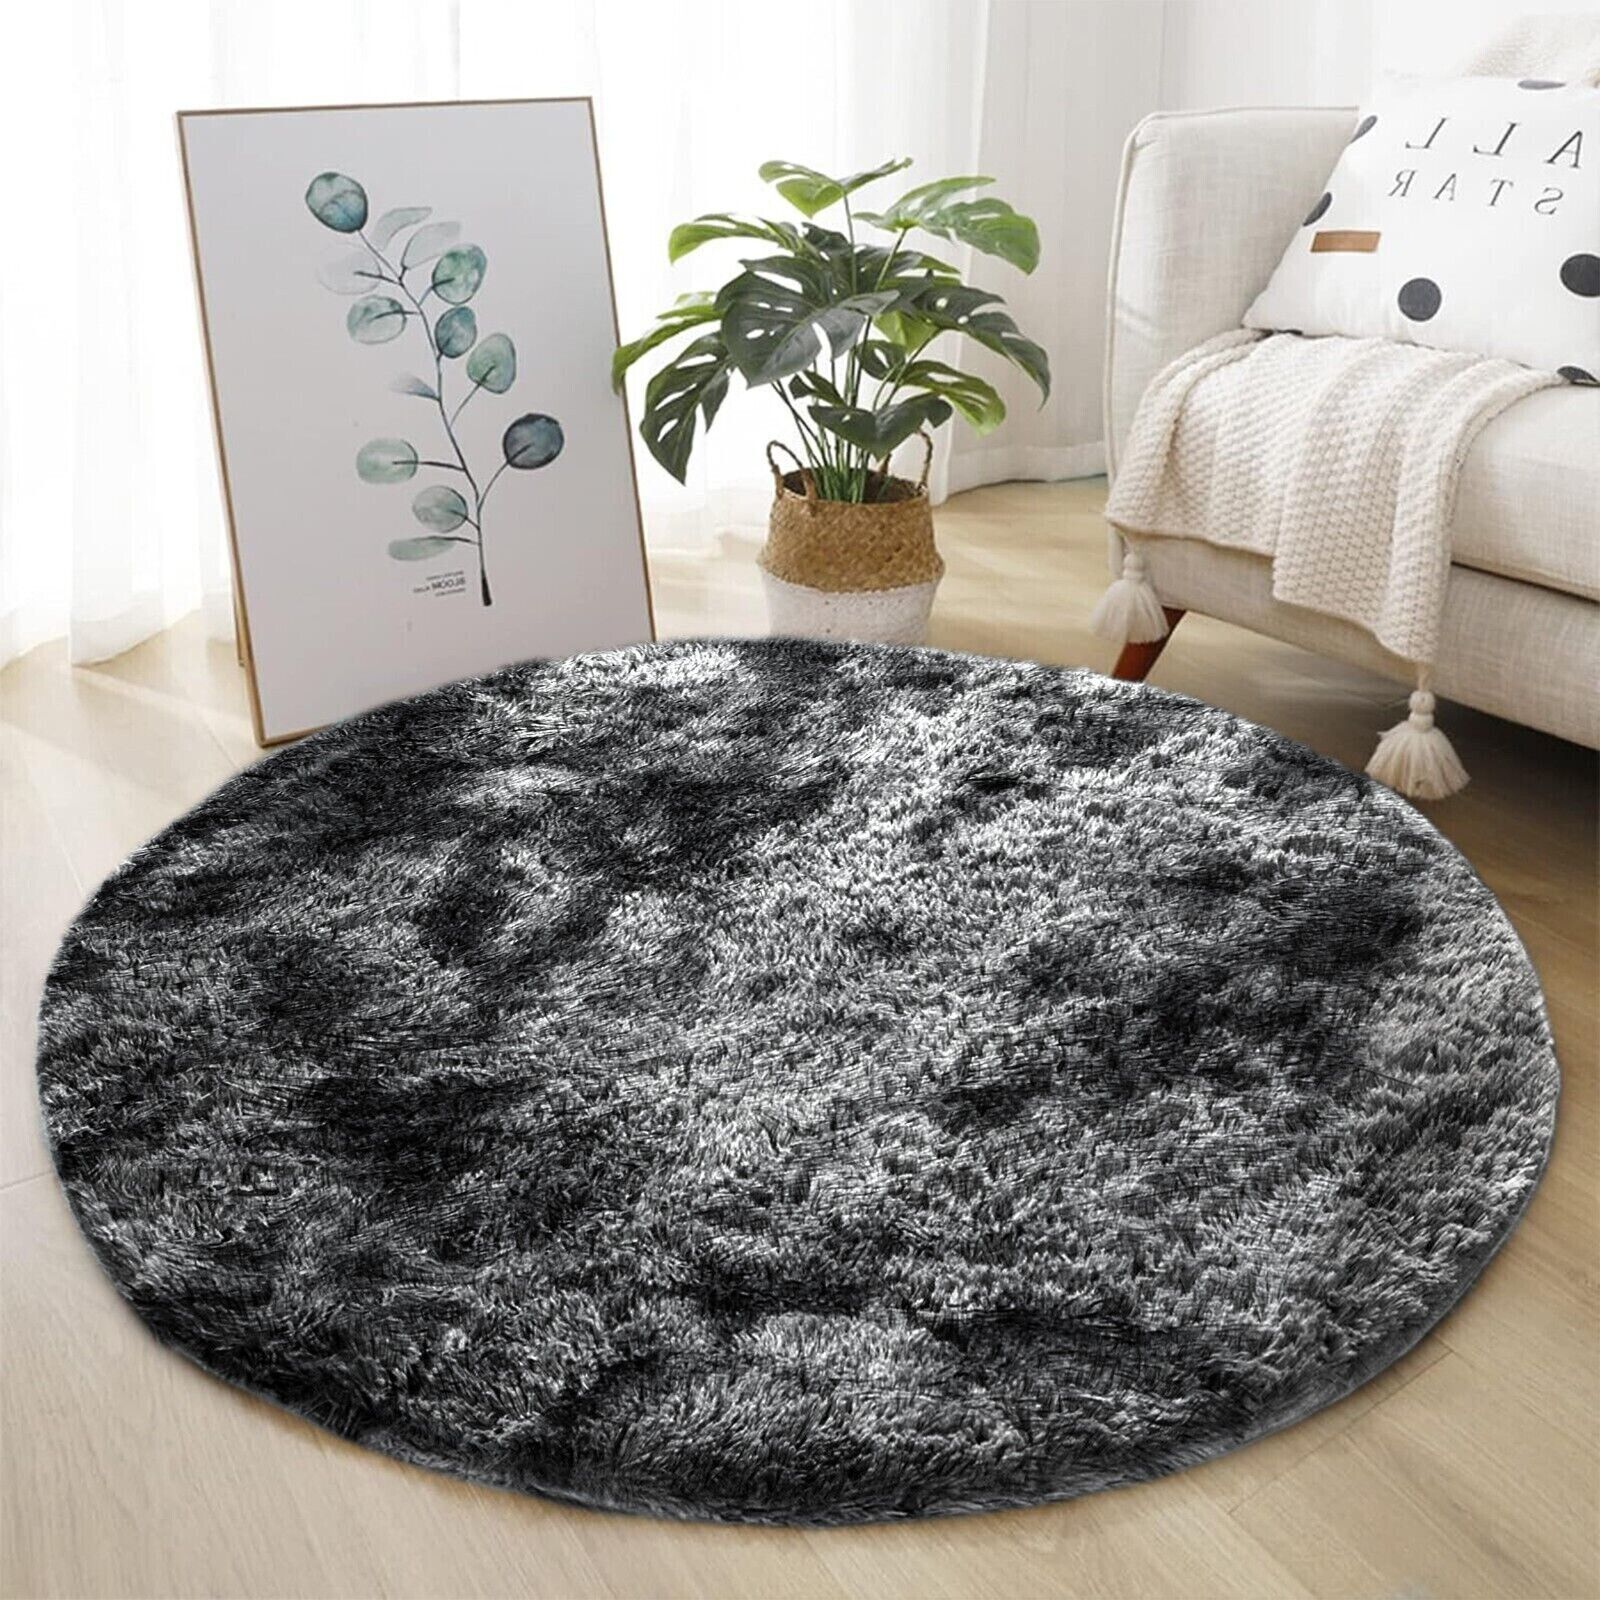 Soft Fluffy Charcoal Shaggy Rugs